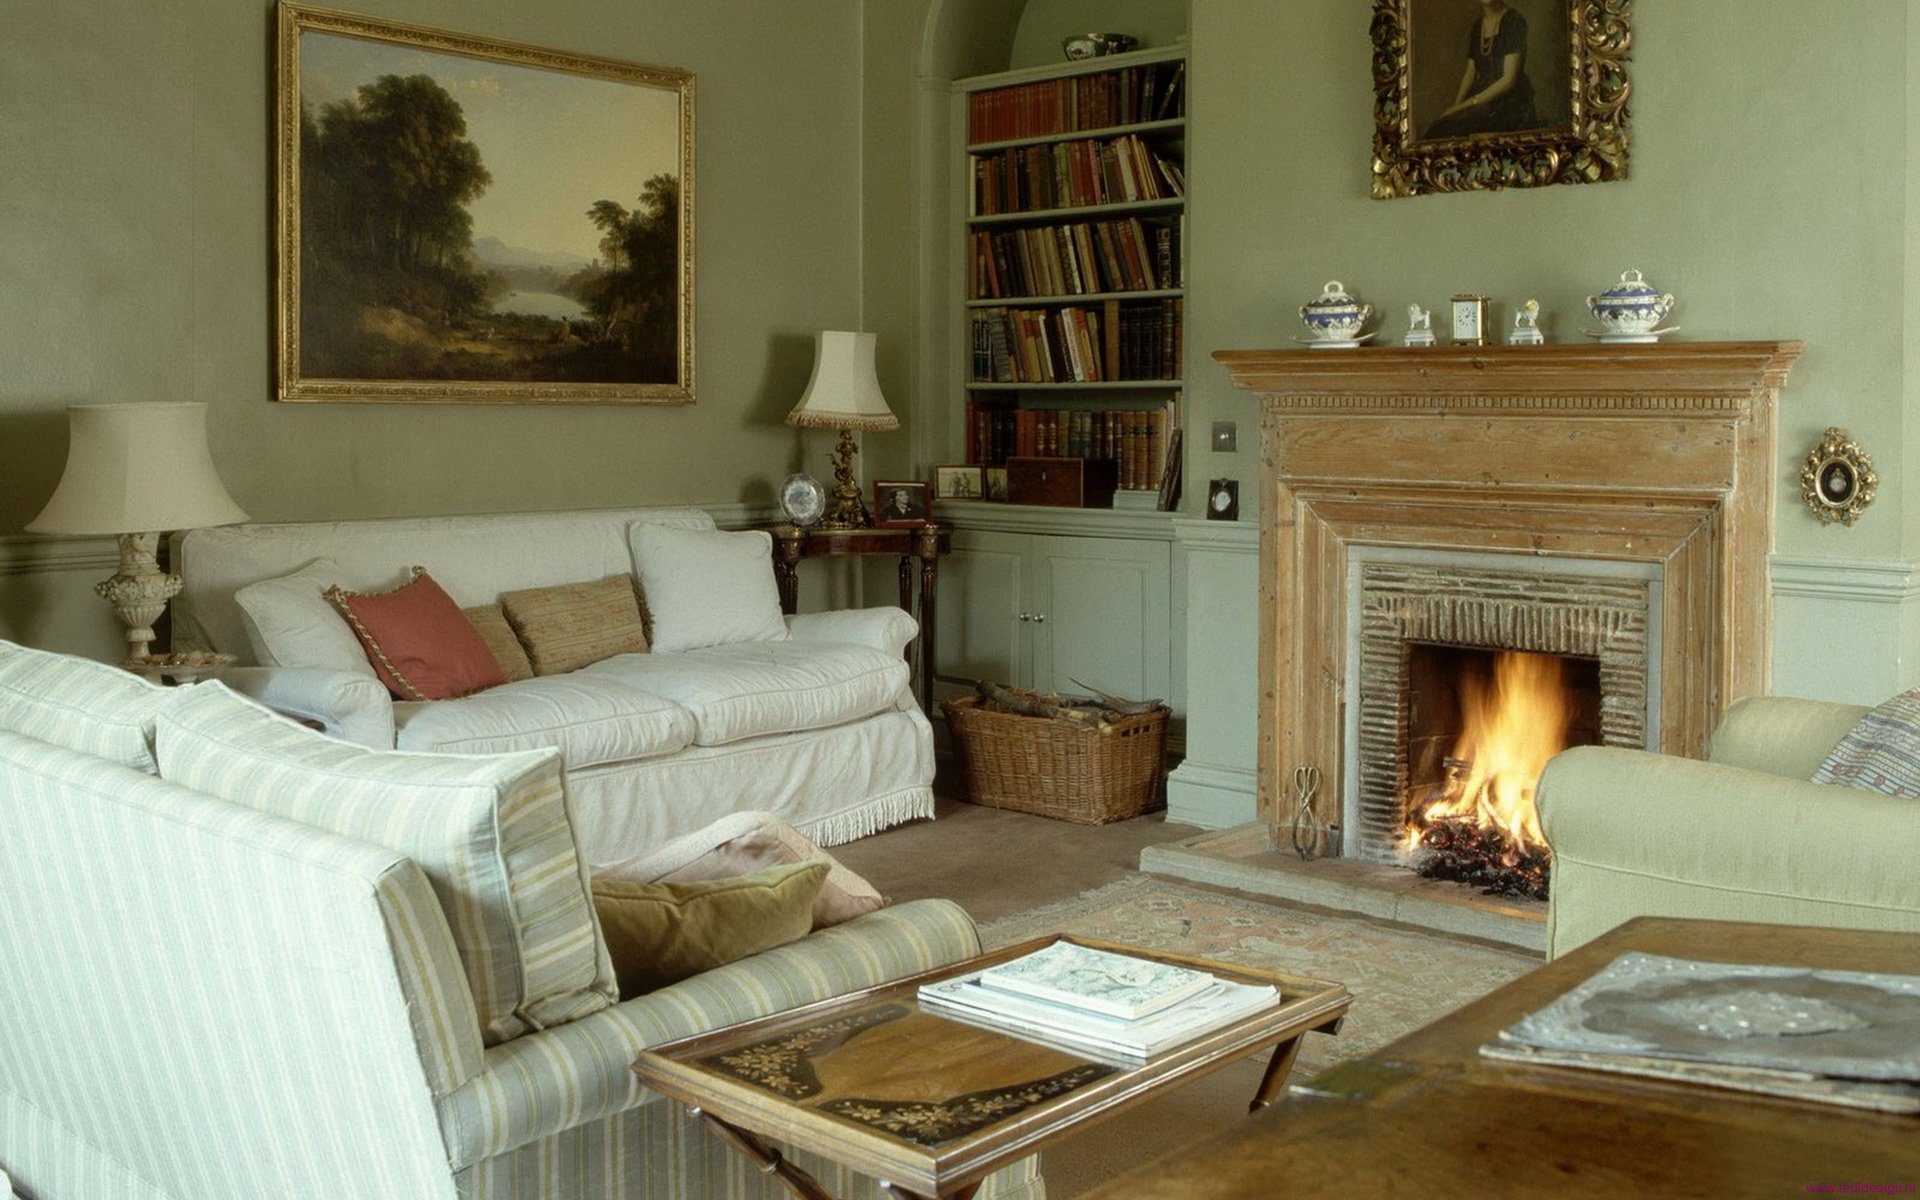 Fireplace design for a small living room with reading area